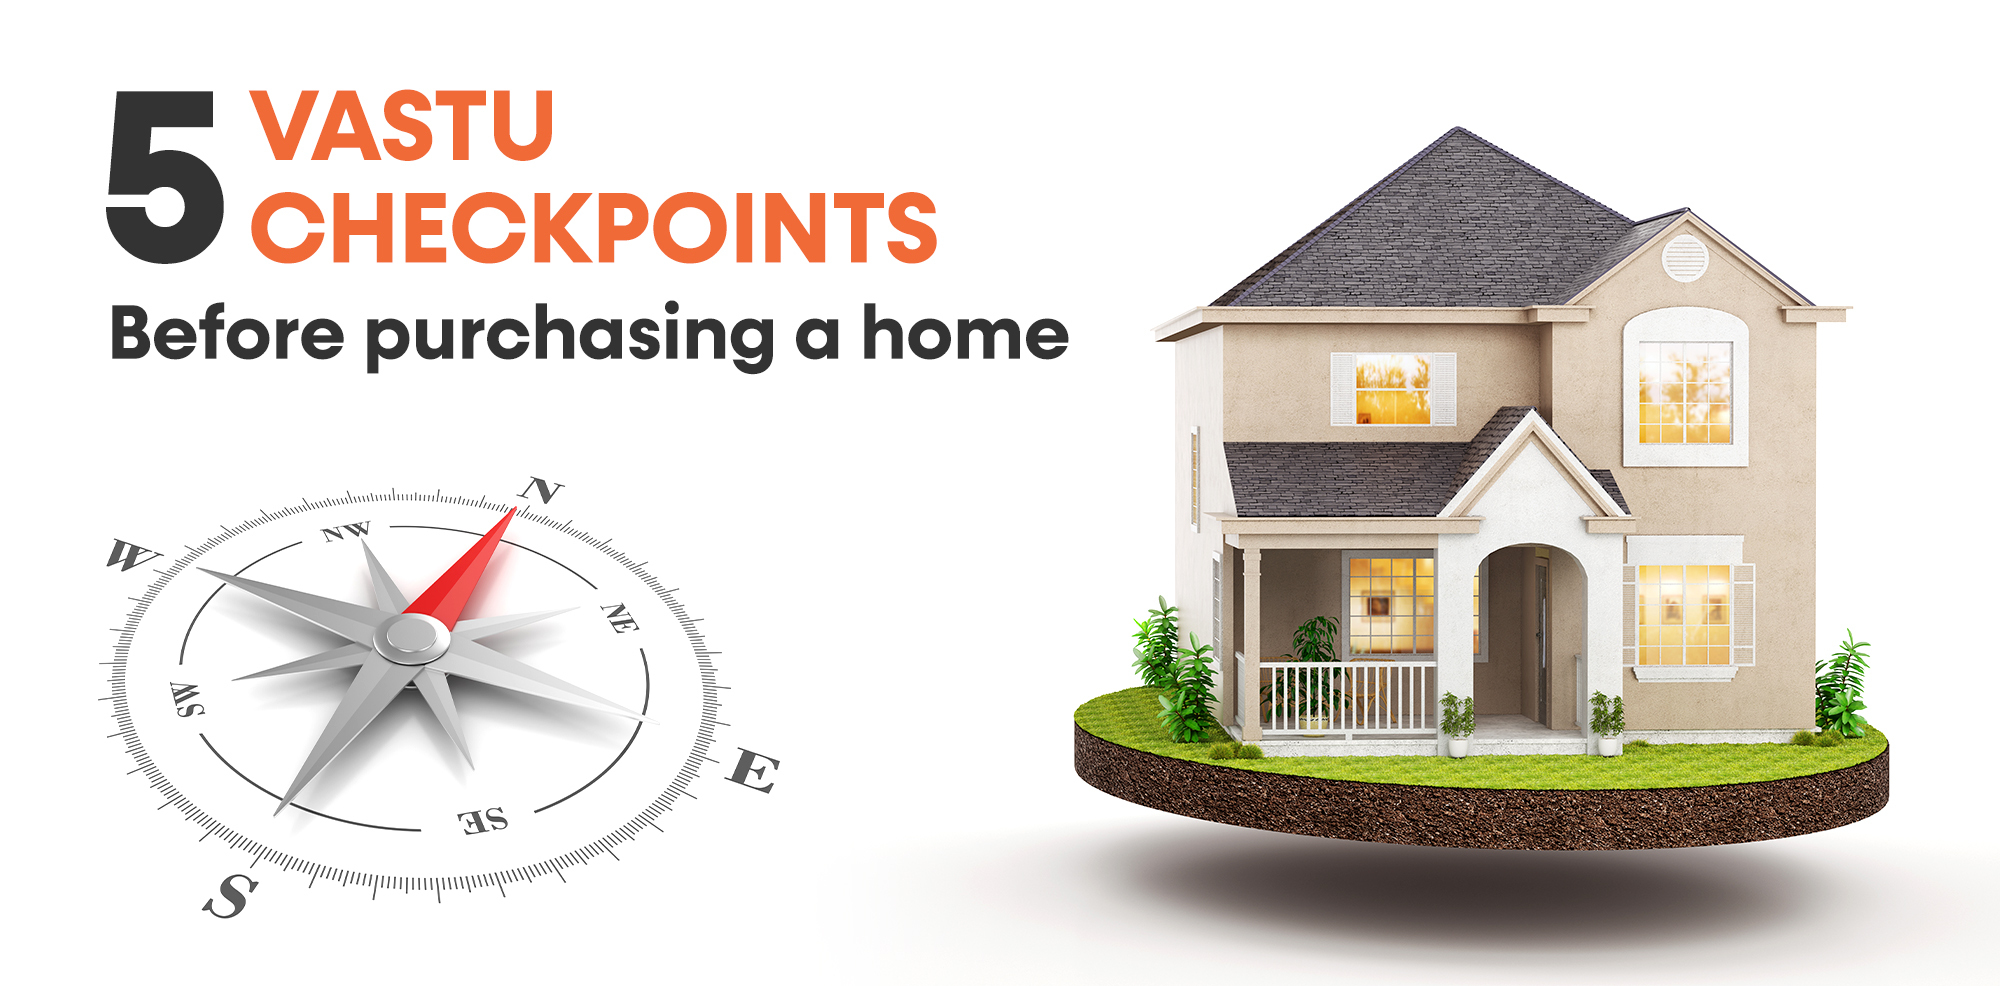 Five Vastu checkpoints before purchasing a home